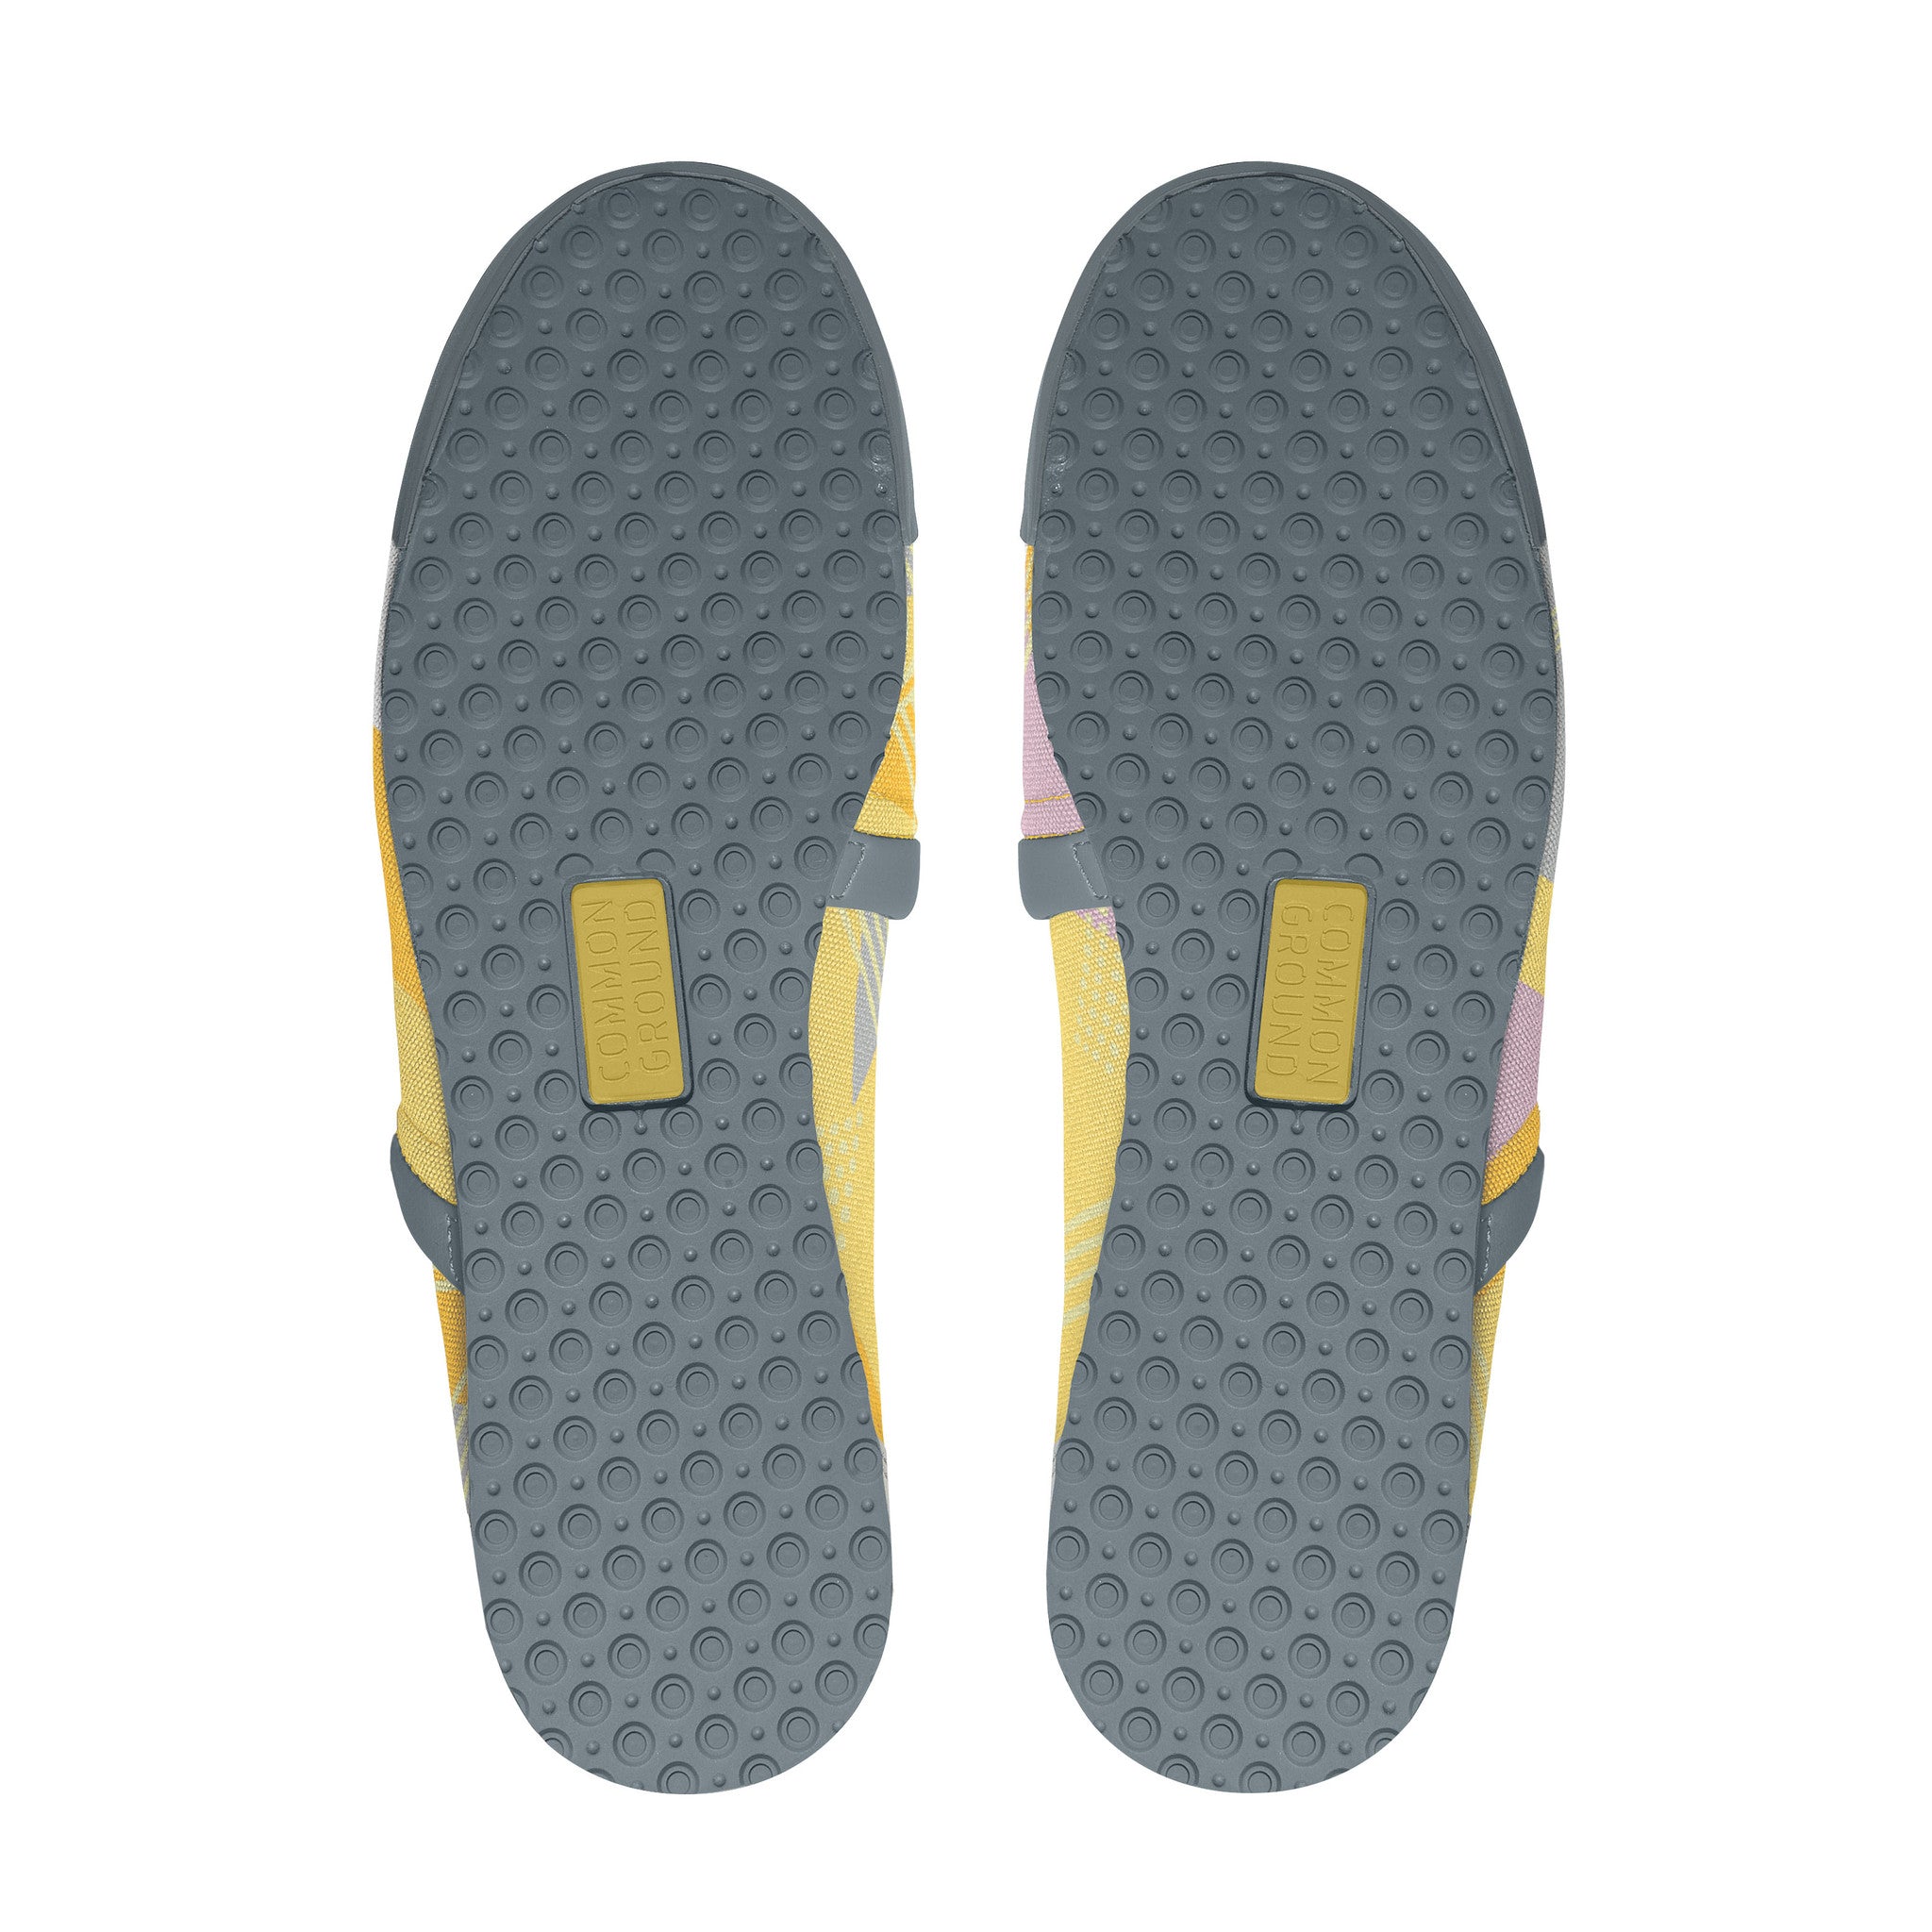 Goldfinch - Common Ground Footwear Shoes Bottom View